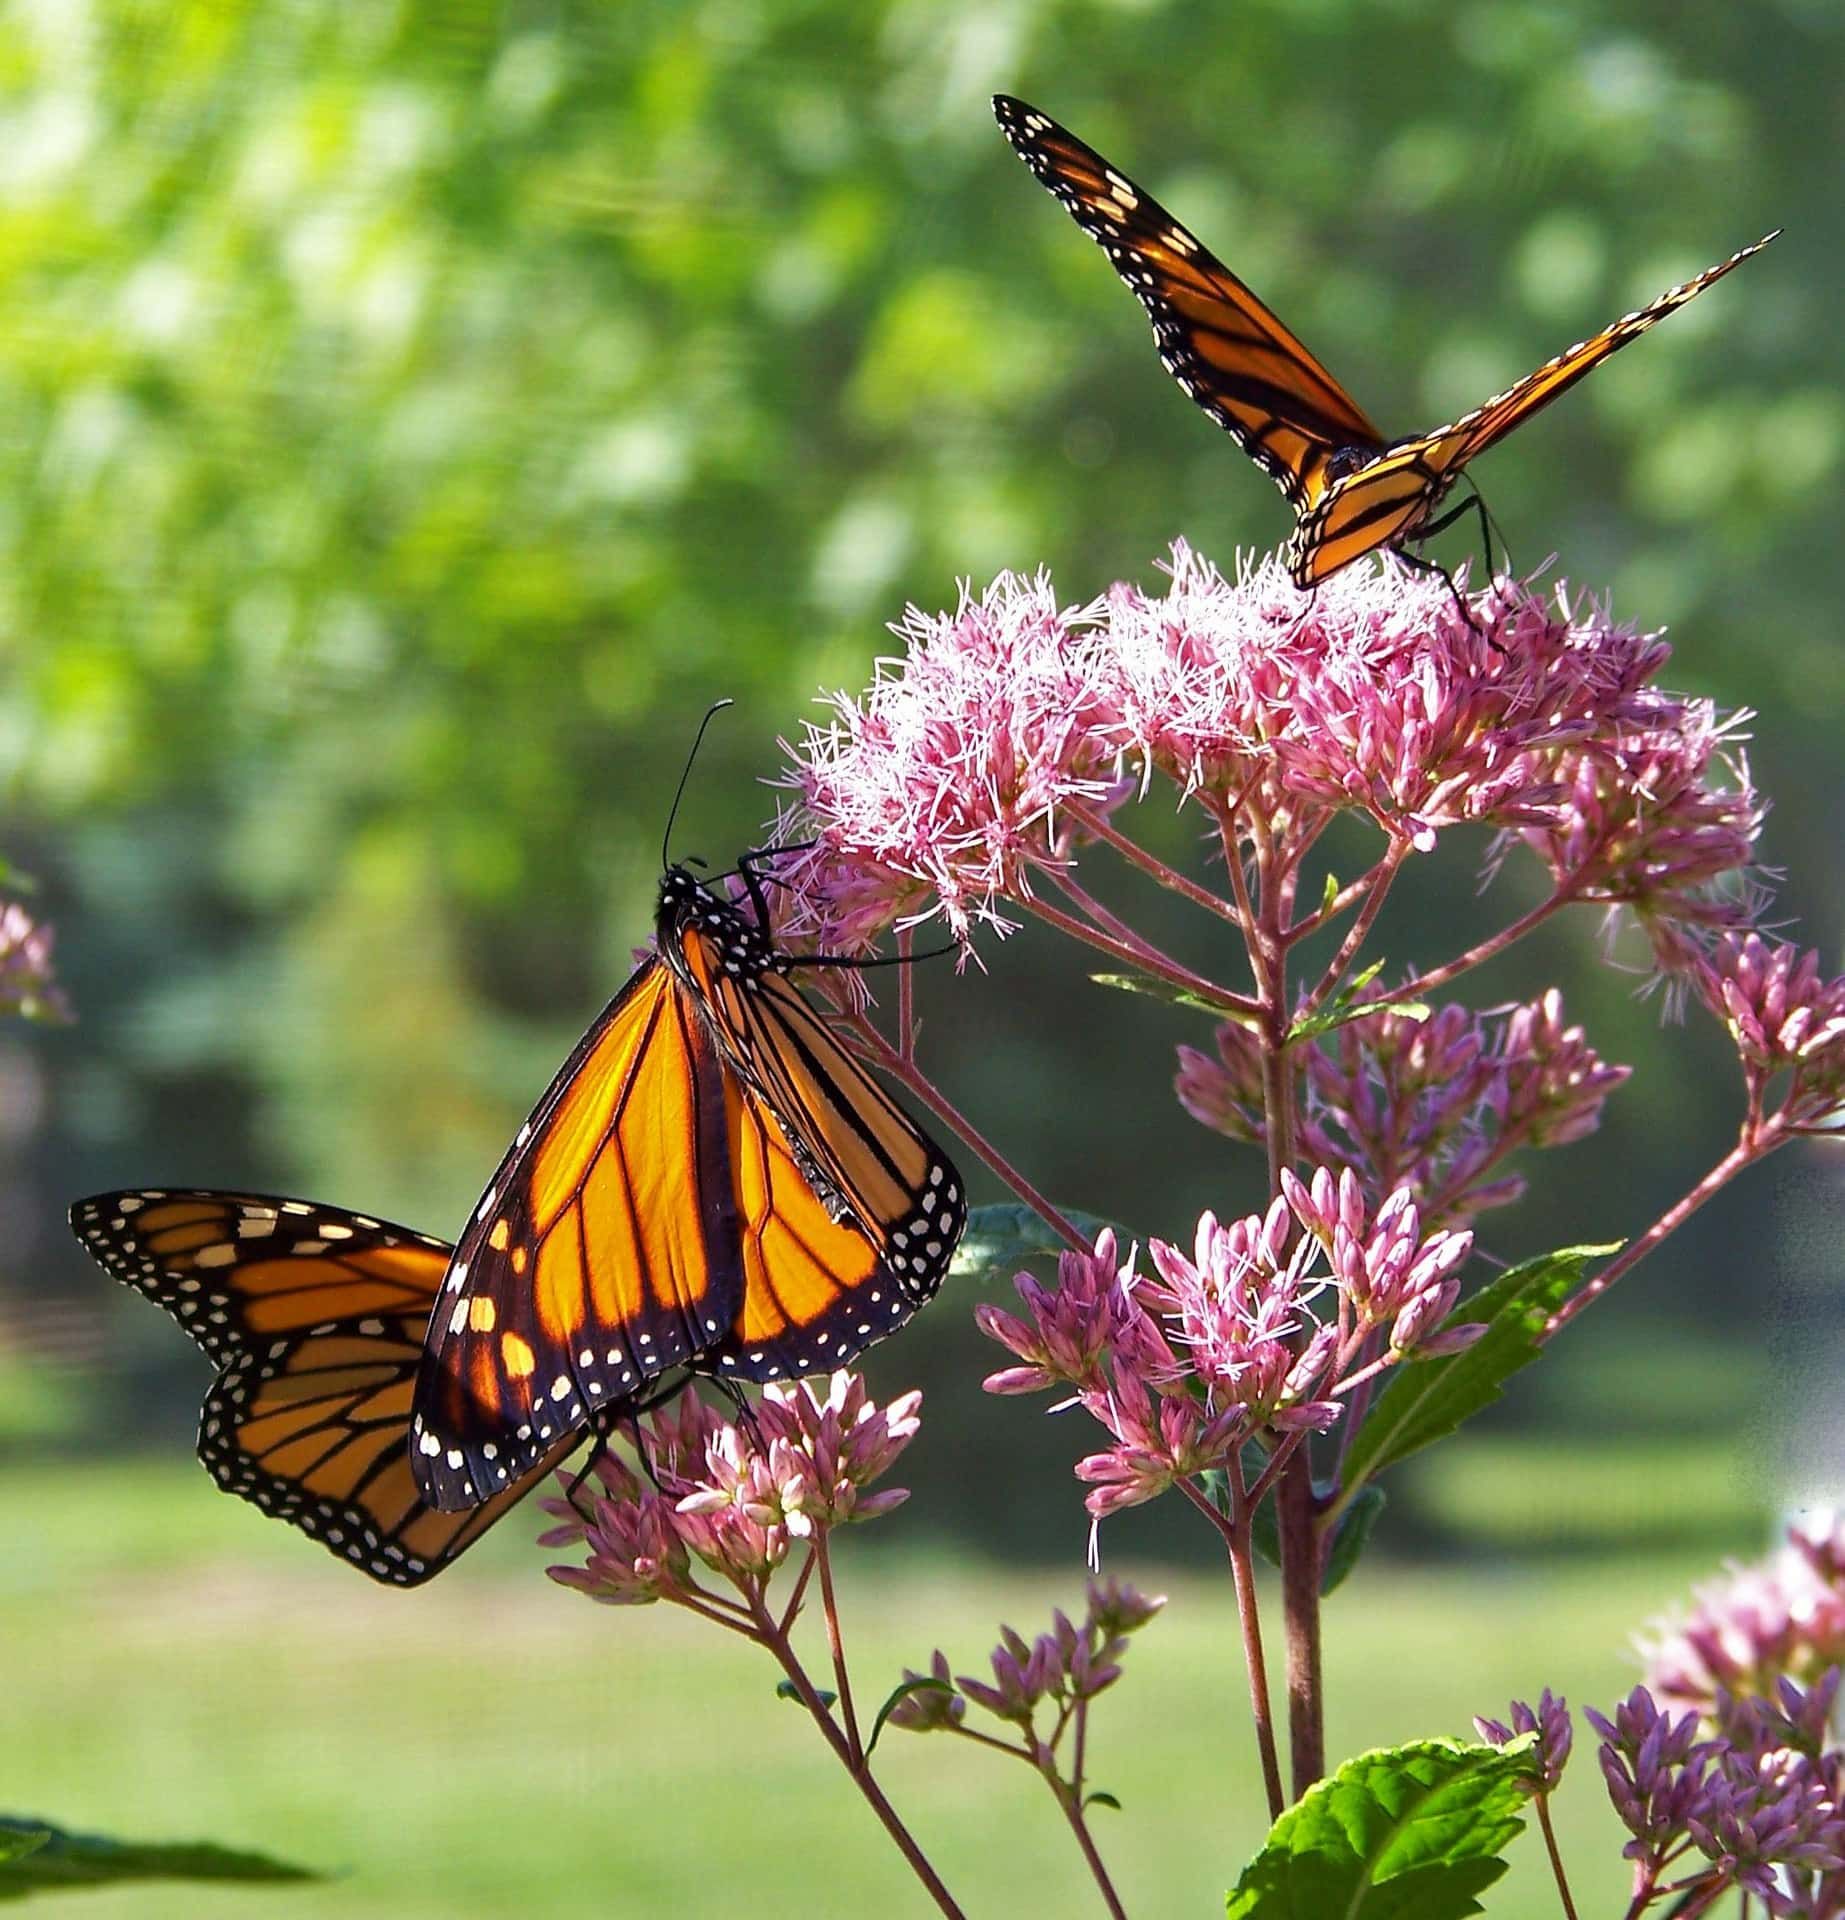 Monarch butterflies collecting nectars on flower.